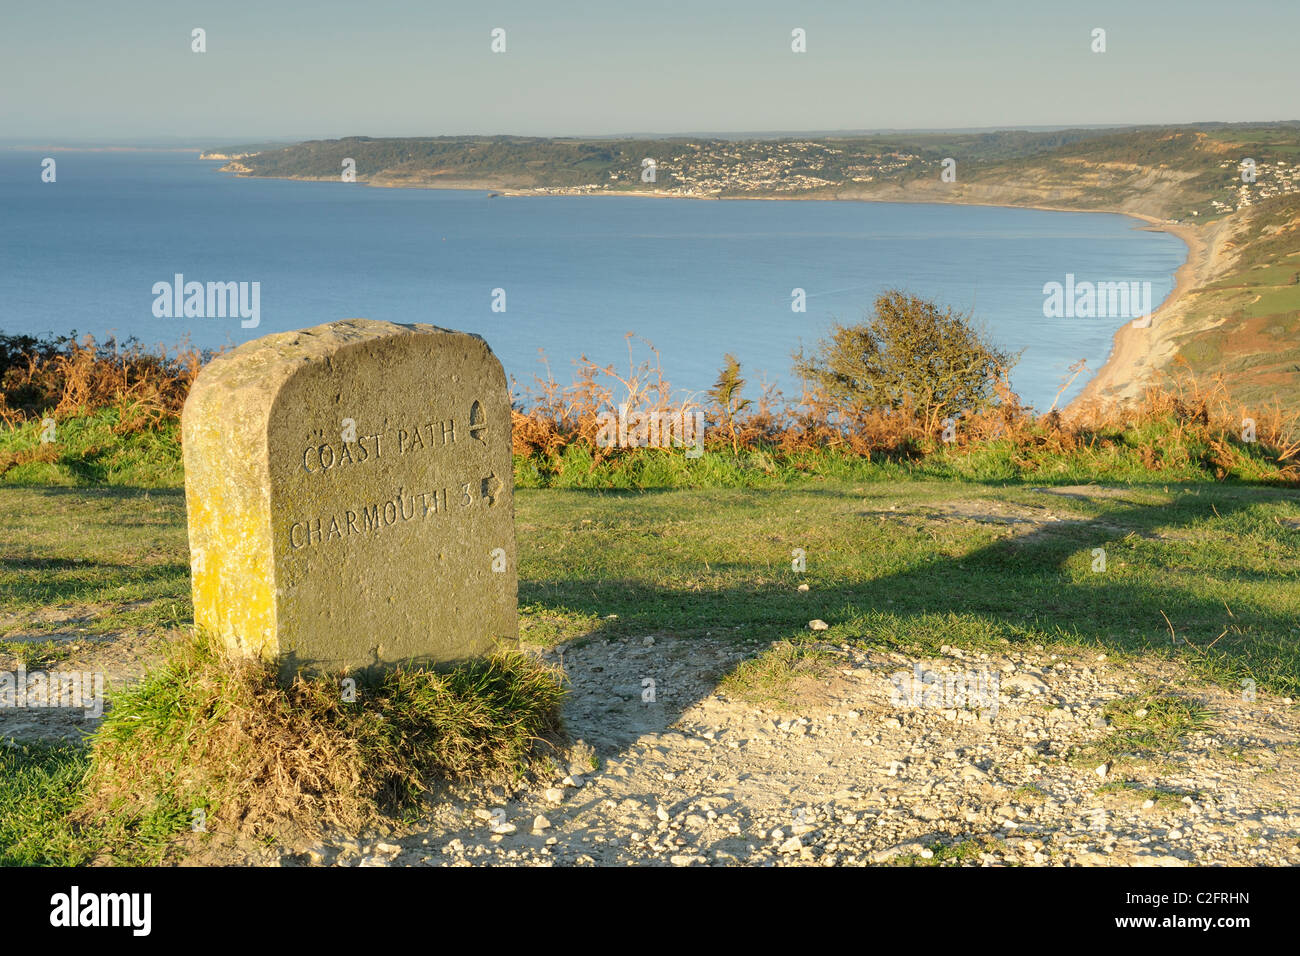 A stone signpost on the South West Coastal Path pointing towards Charmouth, Dorset. Stock Photo